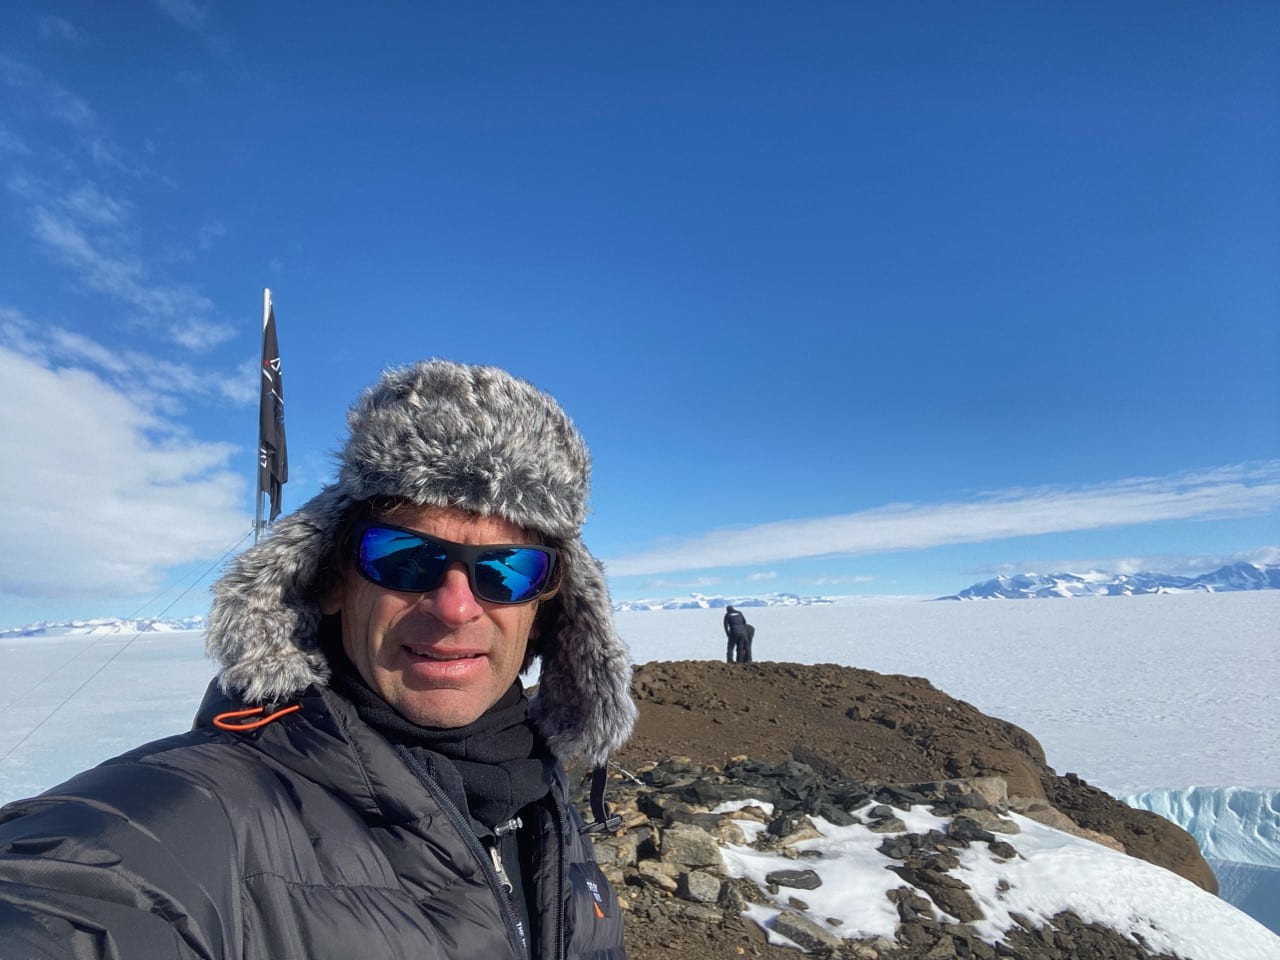 NASA funds a UC Irvine-led mission to record changes in Antarctica’s ice sheet – UCI News